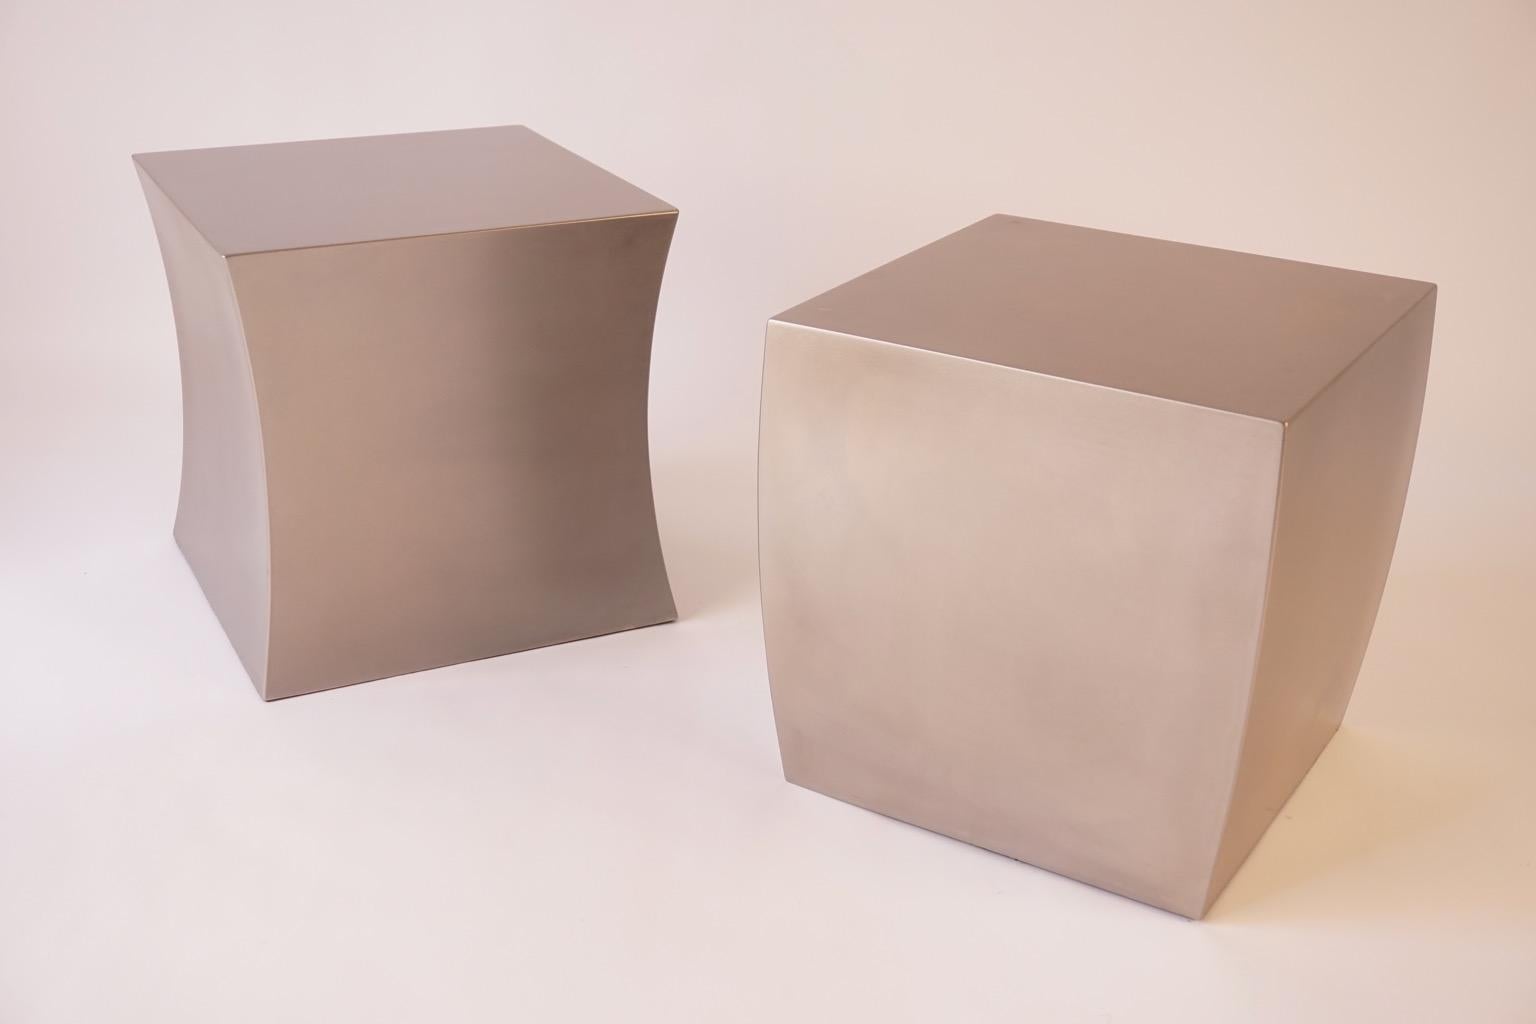 The Lehrecke Studio began making some of their classic pedestals and stools in different metals in 2000. The fabrication of the stainless steel pedestal is from a sold sheet material, expertly crafted with a random orbital finish. This set included